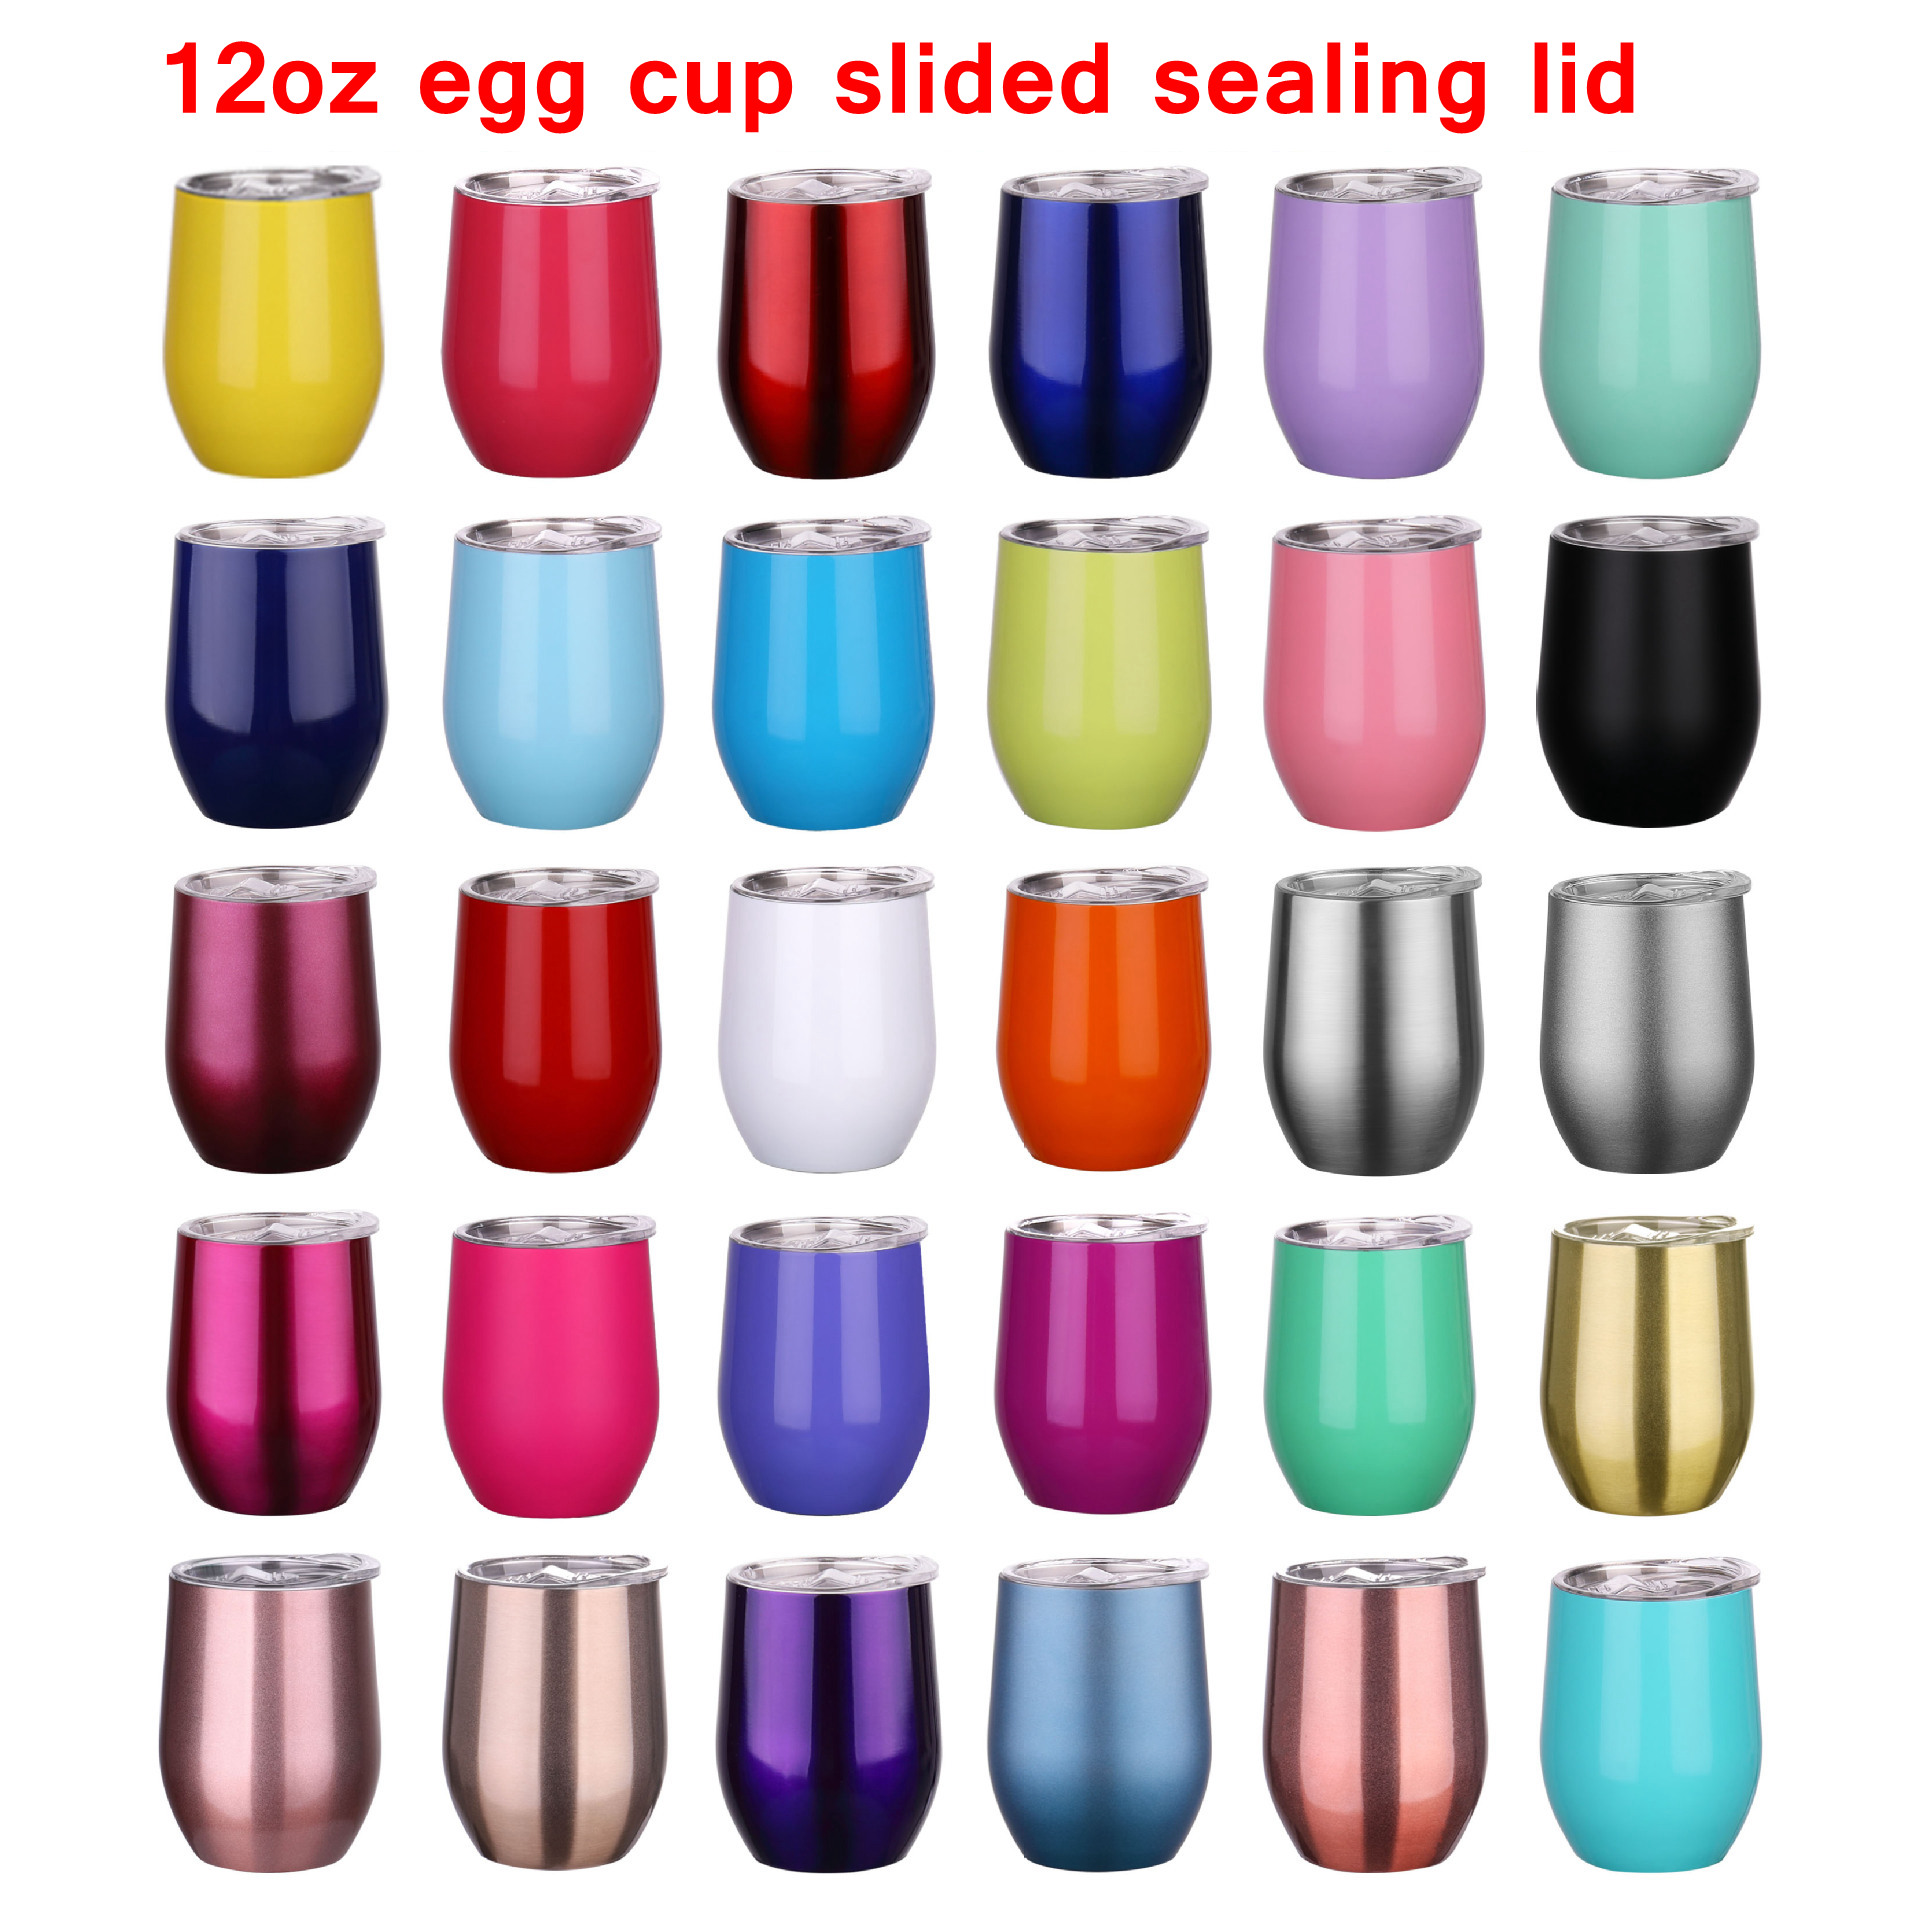 

12oz Egg Cup Mug Stainless Steel Wine Tumbler Double Wall Eggs Shape Cups Tumblers With Sealing Lid Insulated Glasses Drinkware Favors YFA2717, With slided sealing lid